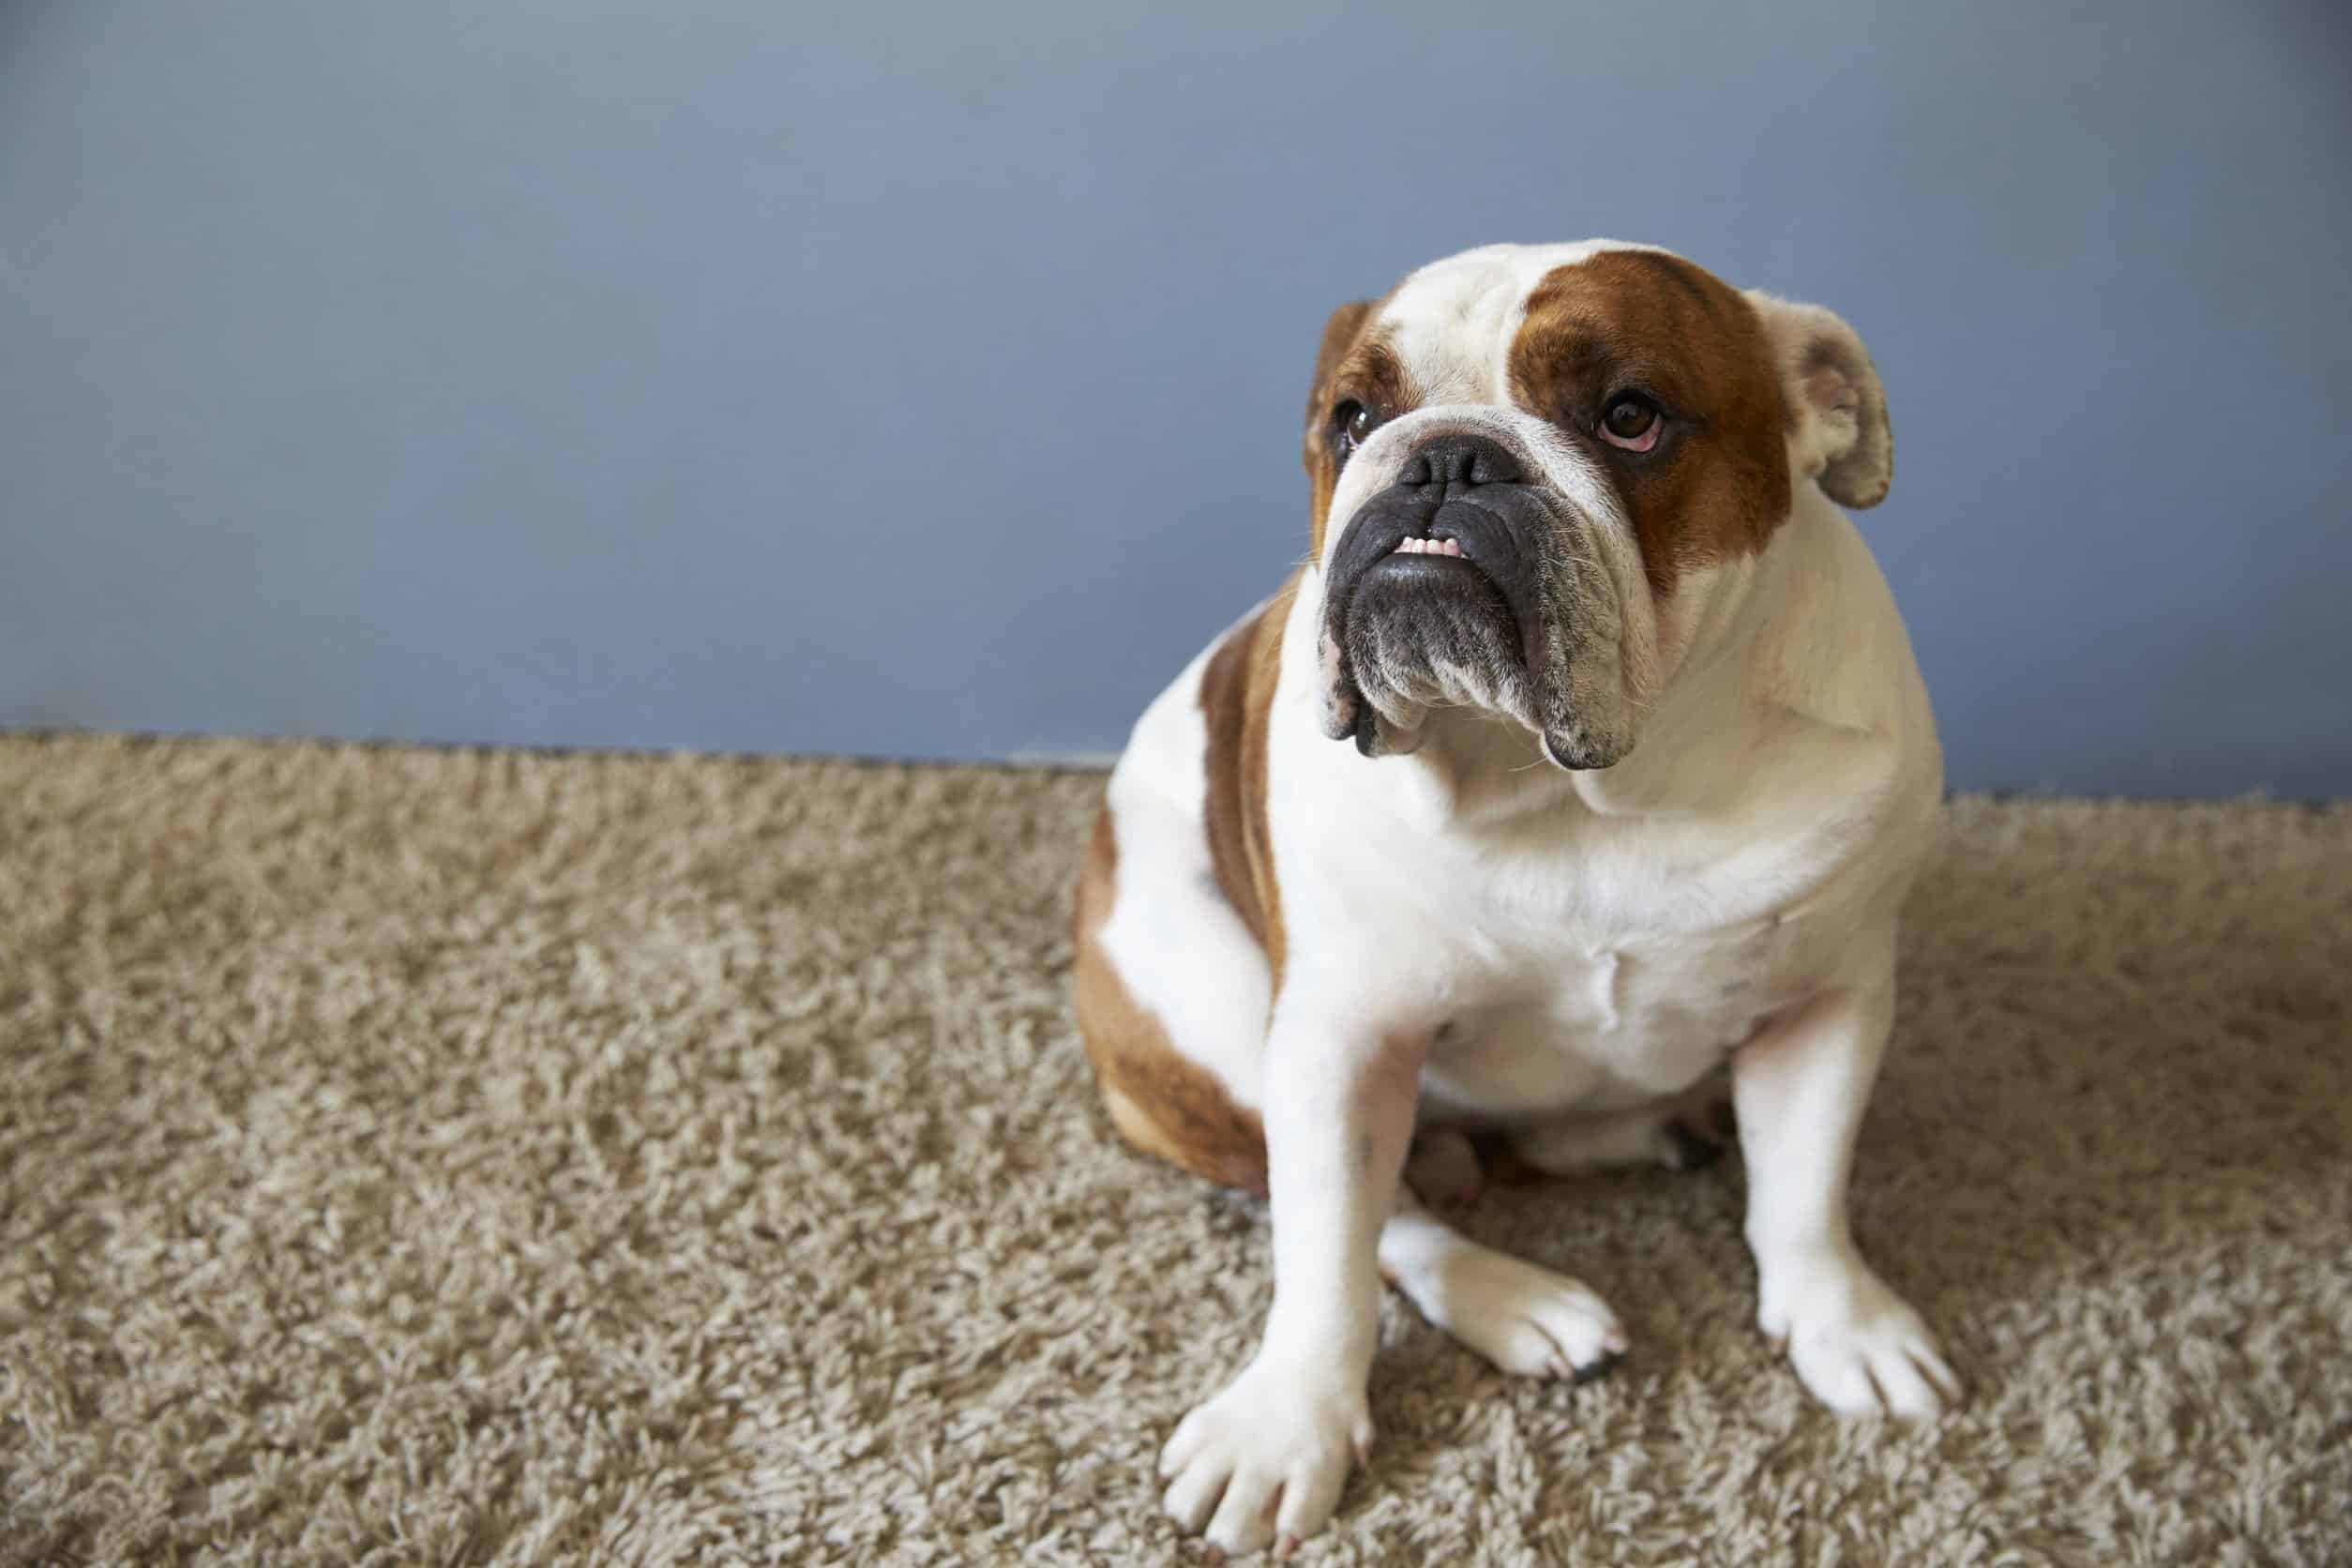 How To Stop Dogs From Peeing On Rugs